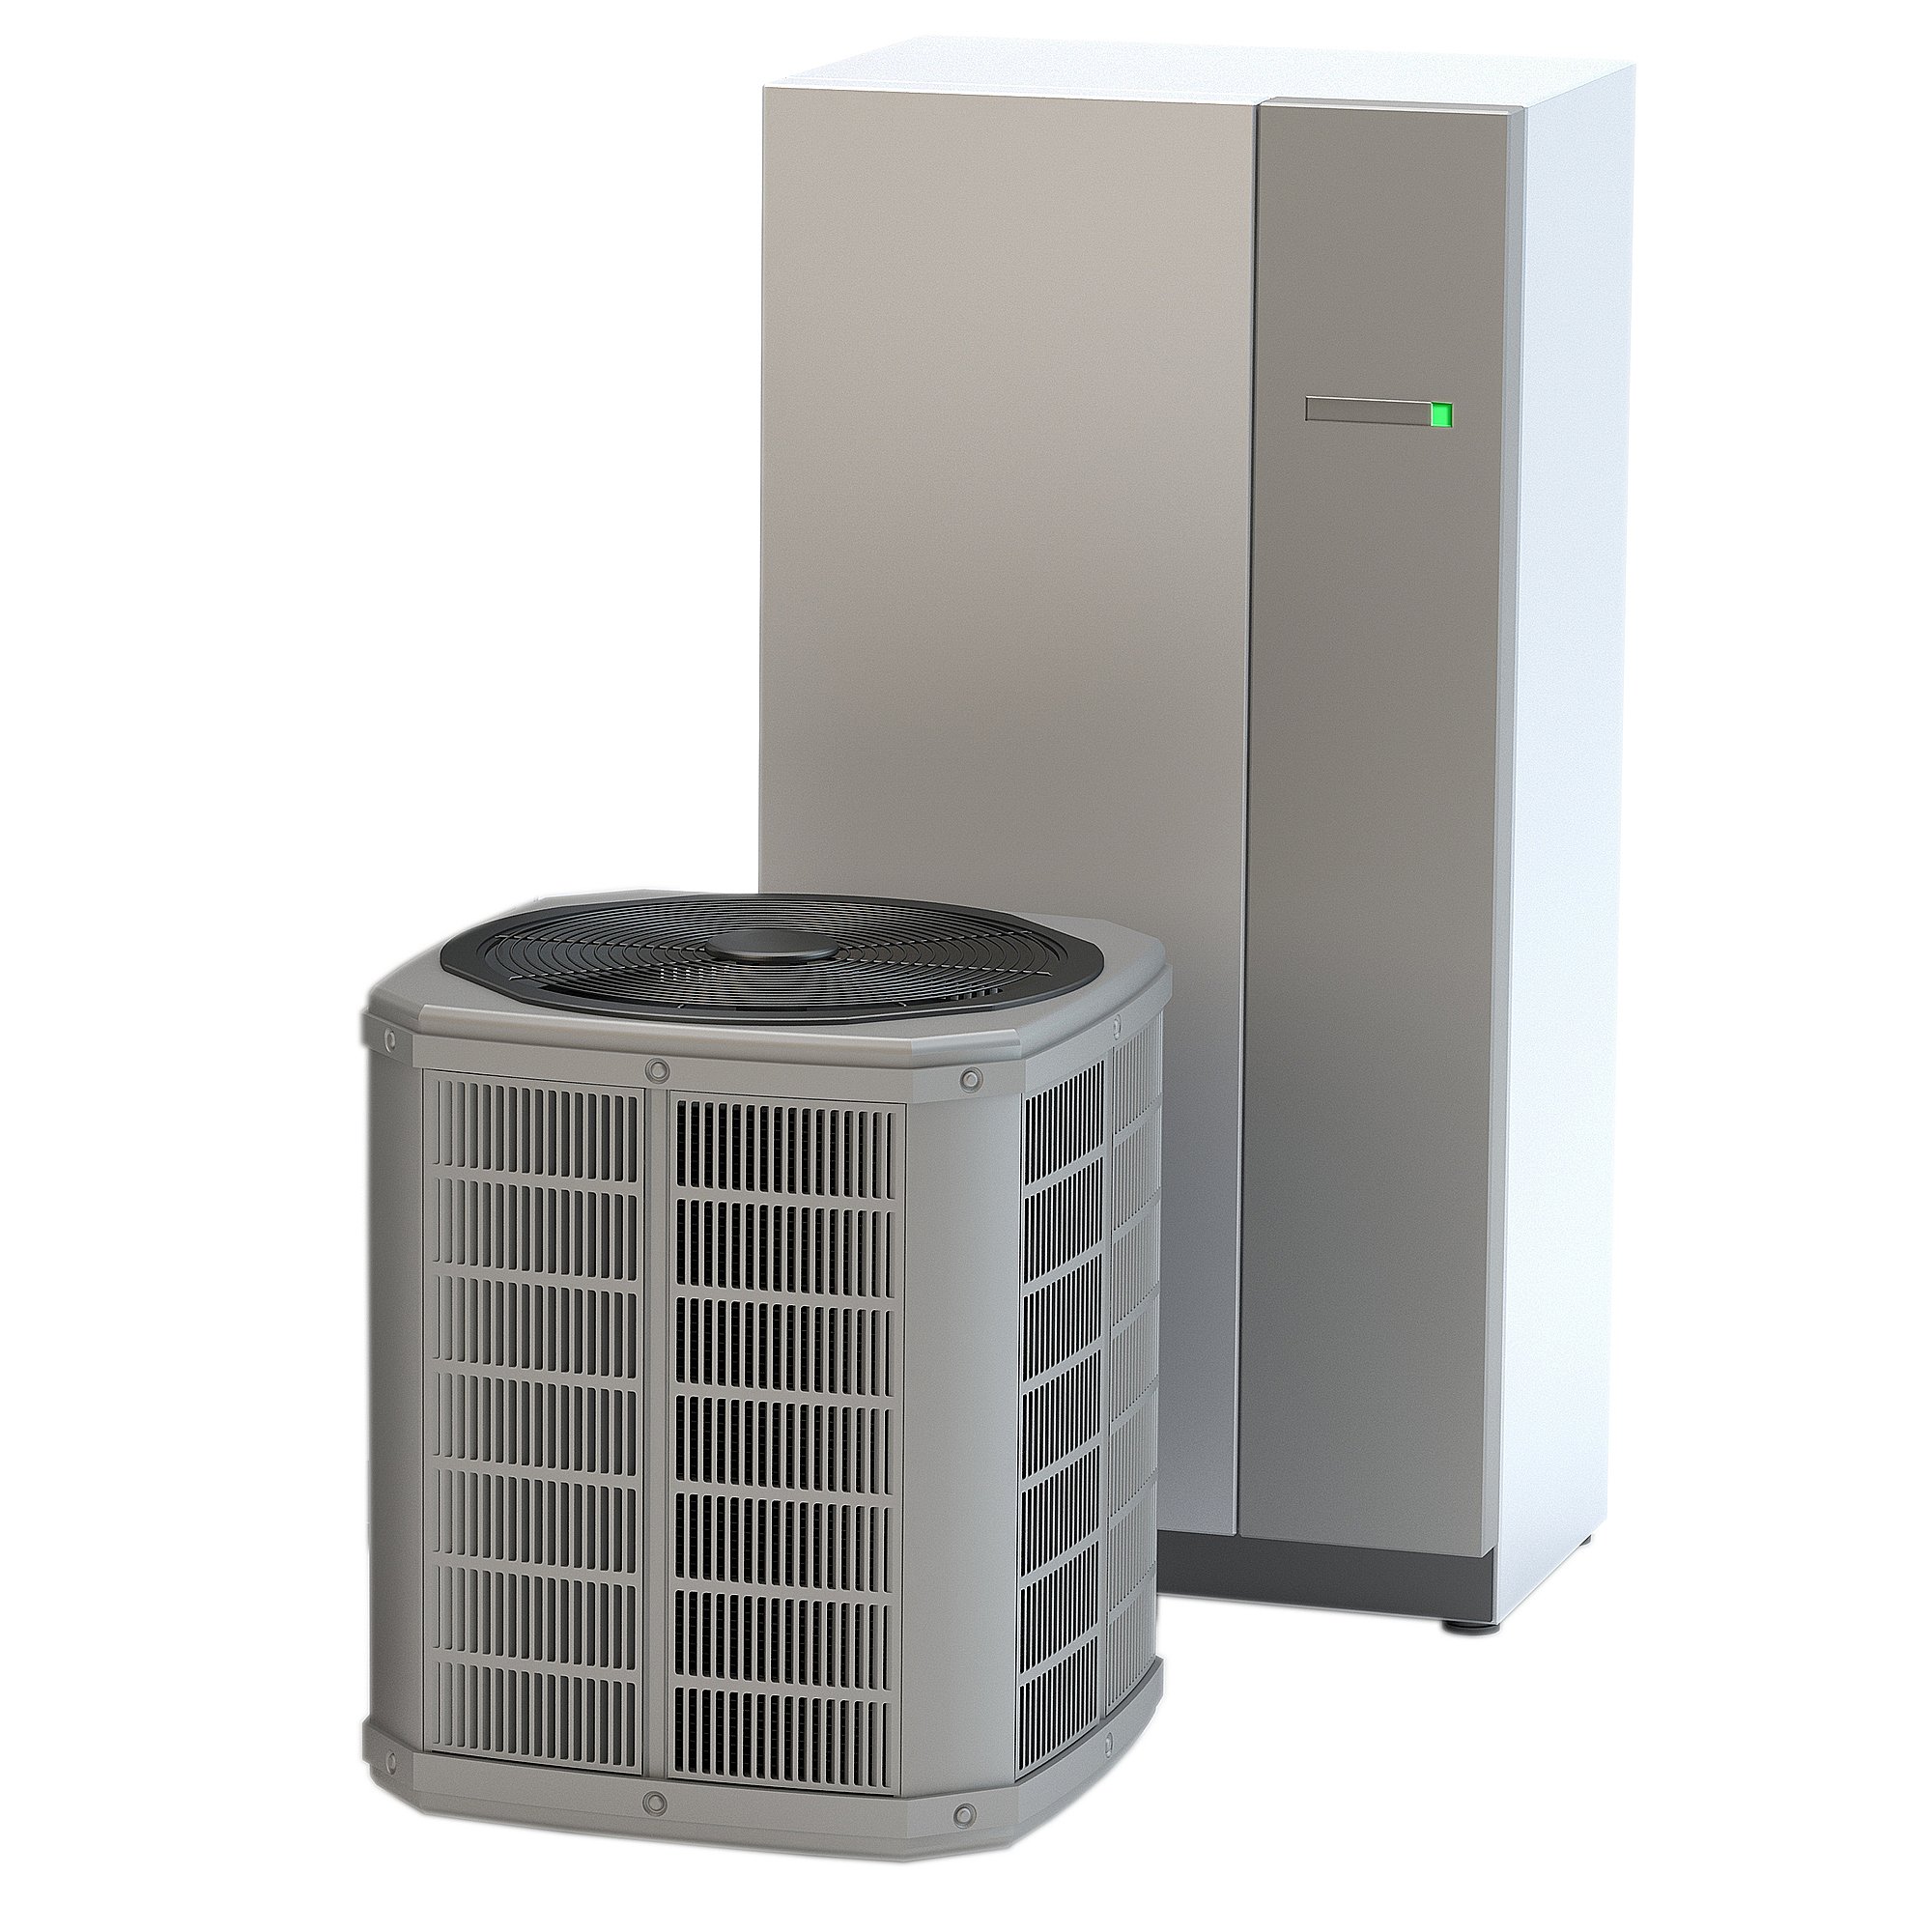 Heating & Cooling Combined Unit